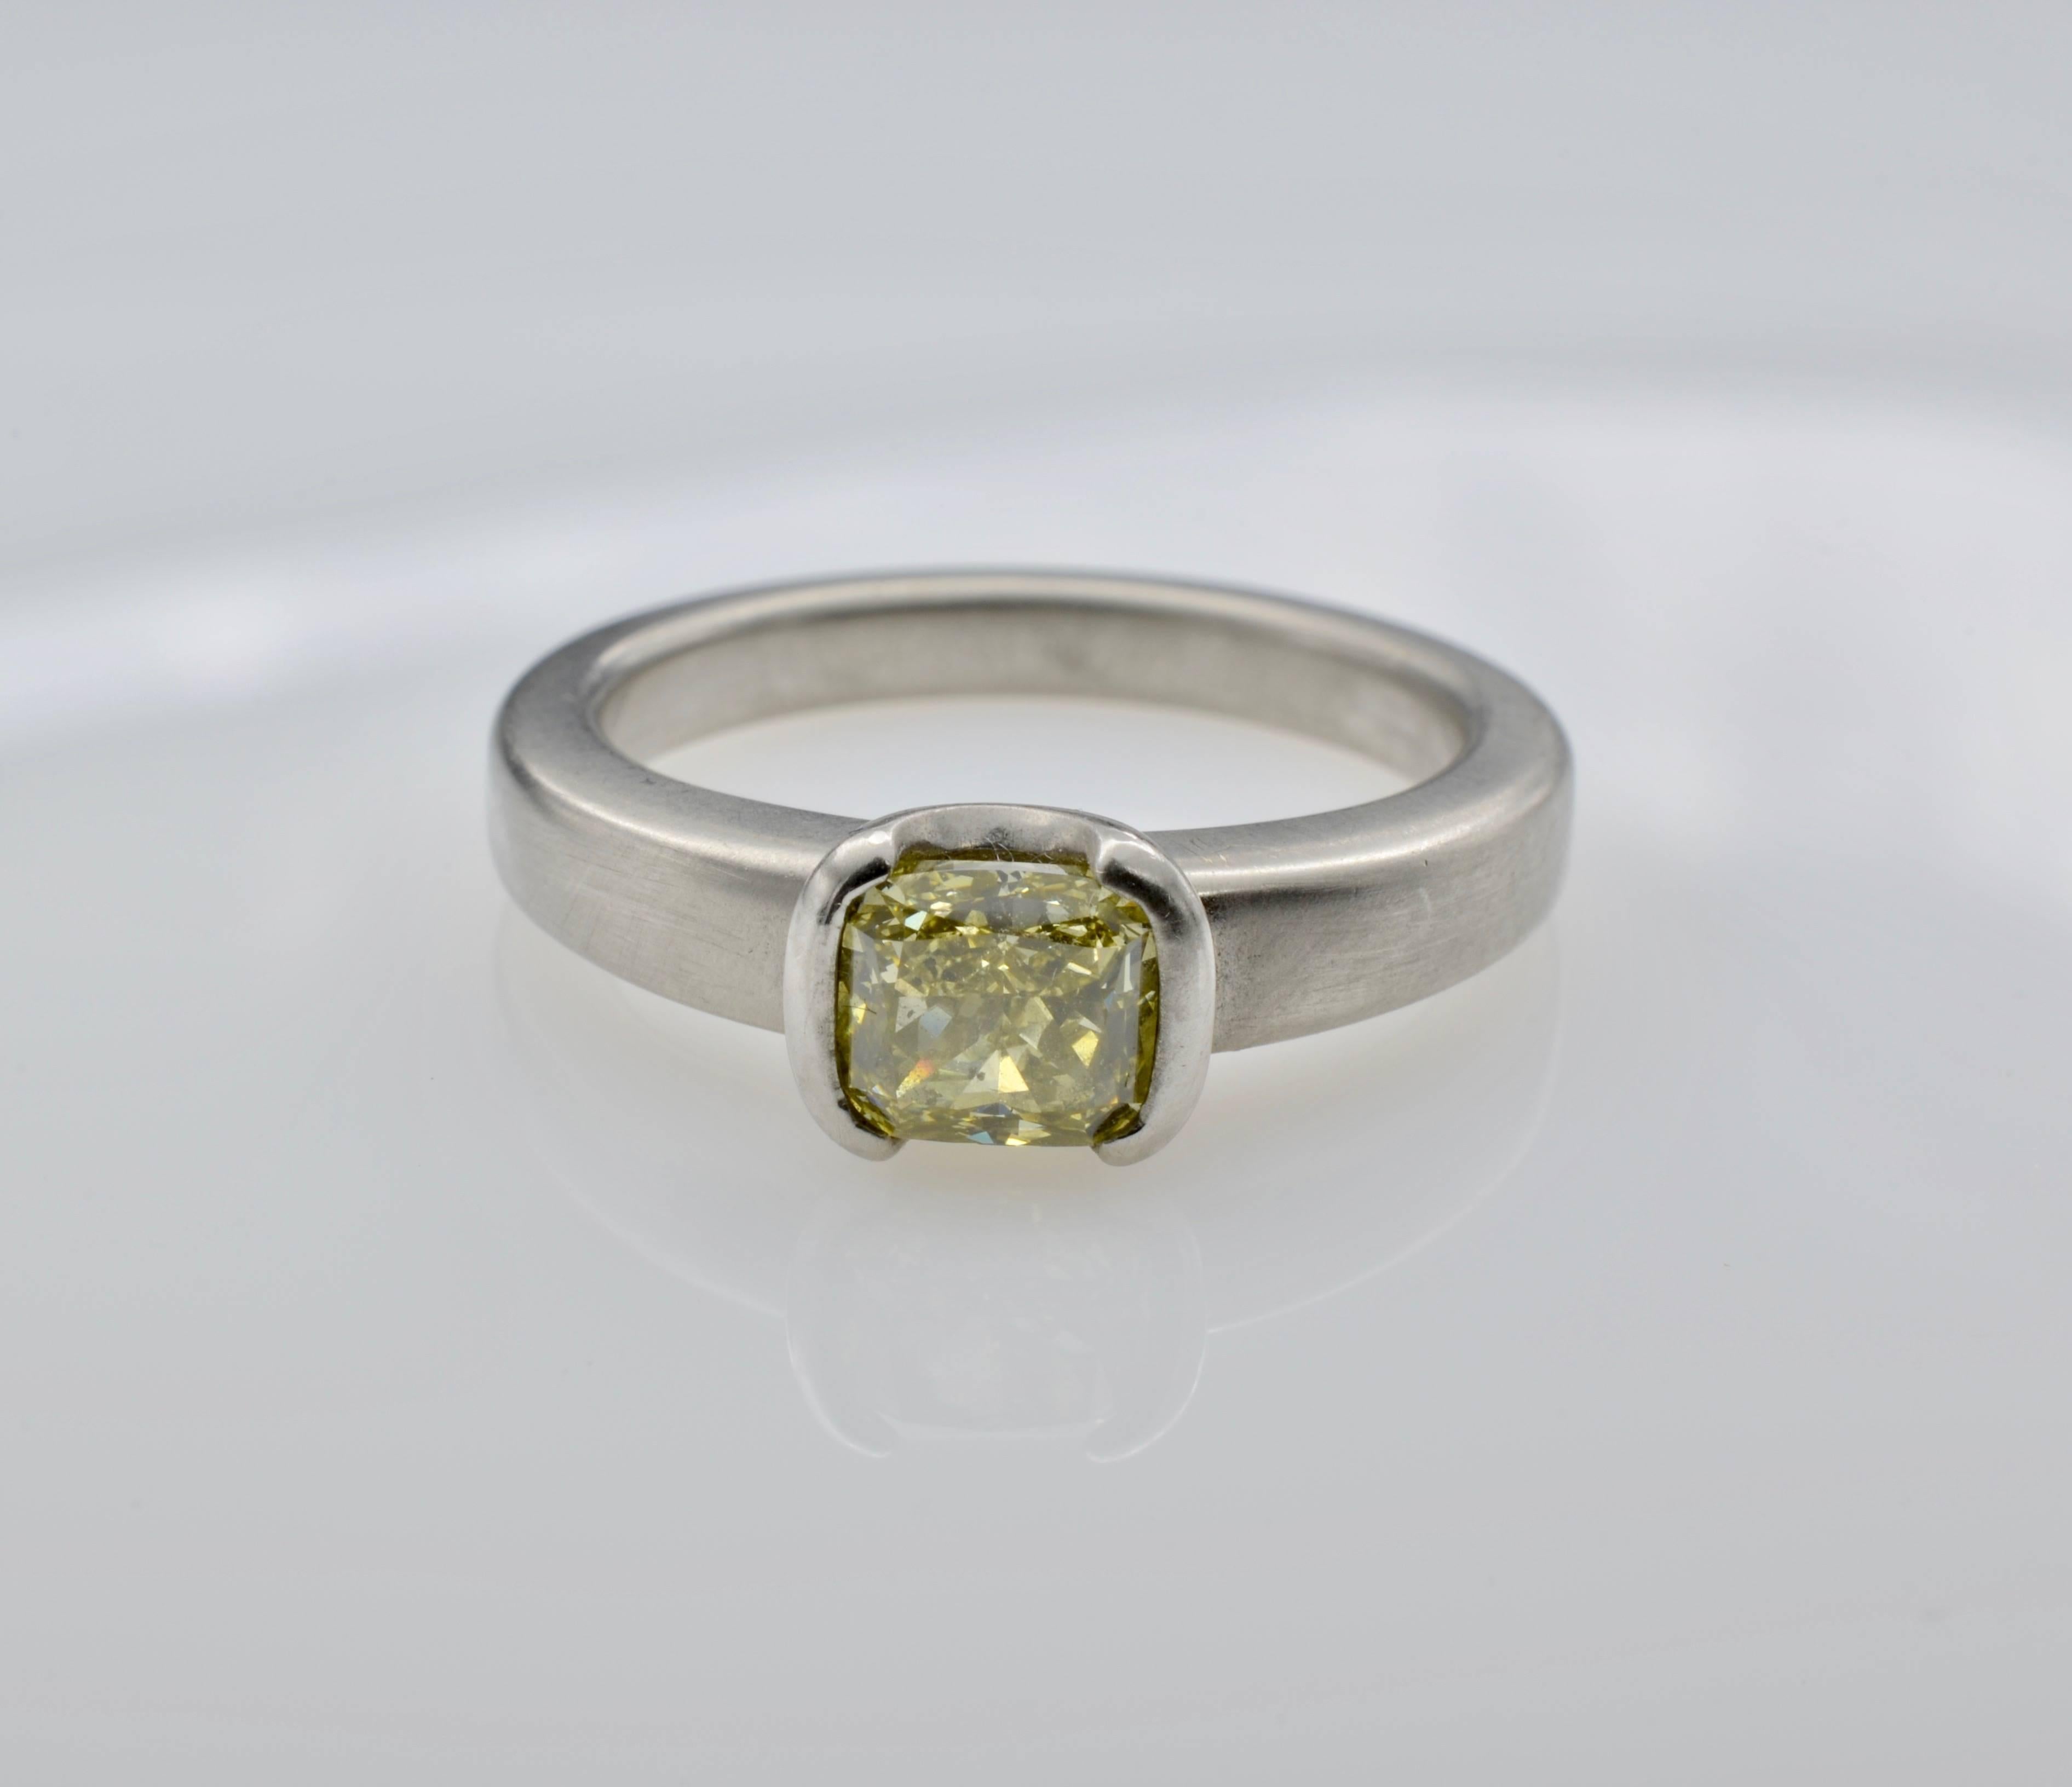 This bright lemon yellow radiant cut diamond ring is set in a satin finished slightly tapered platinum band. Sparkles galore in this bright 0.93 carat diamond ring with a brilliant contrast of soft warm platinum and mouth watering lemon yellow